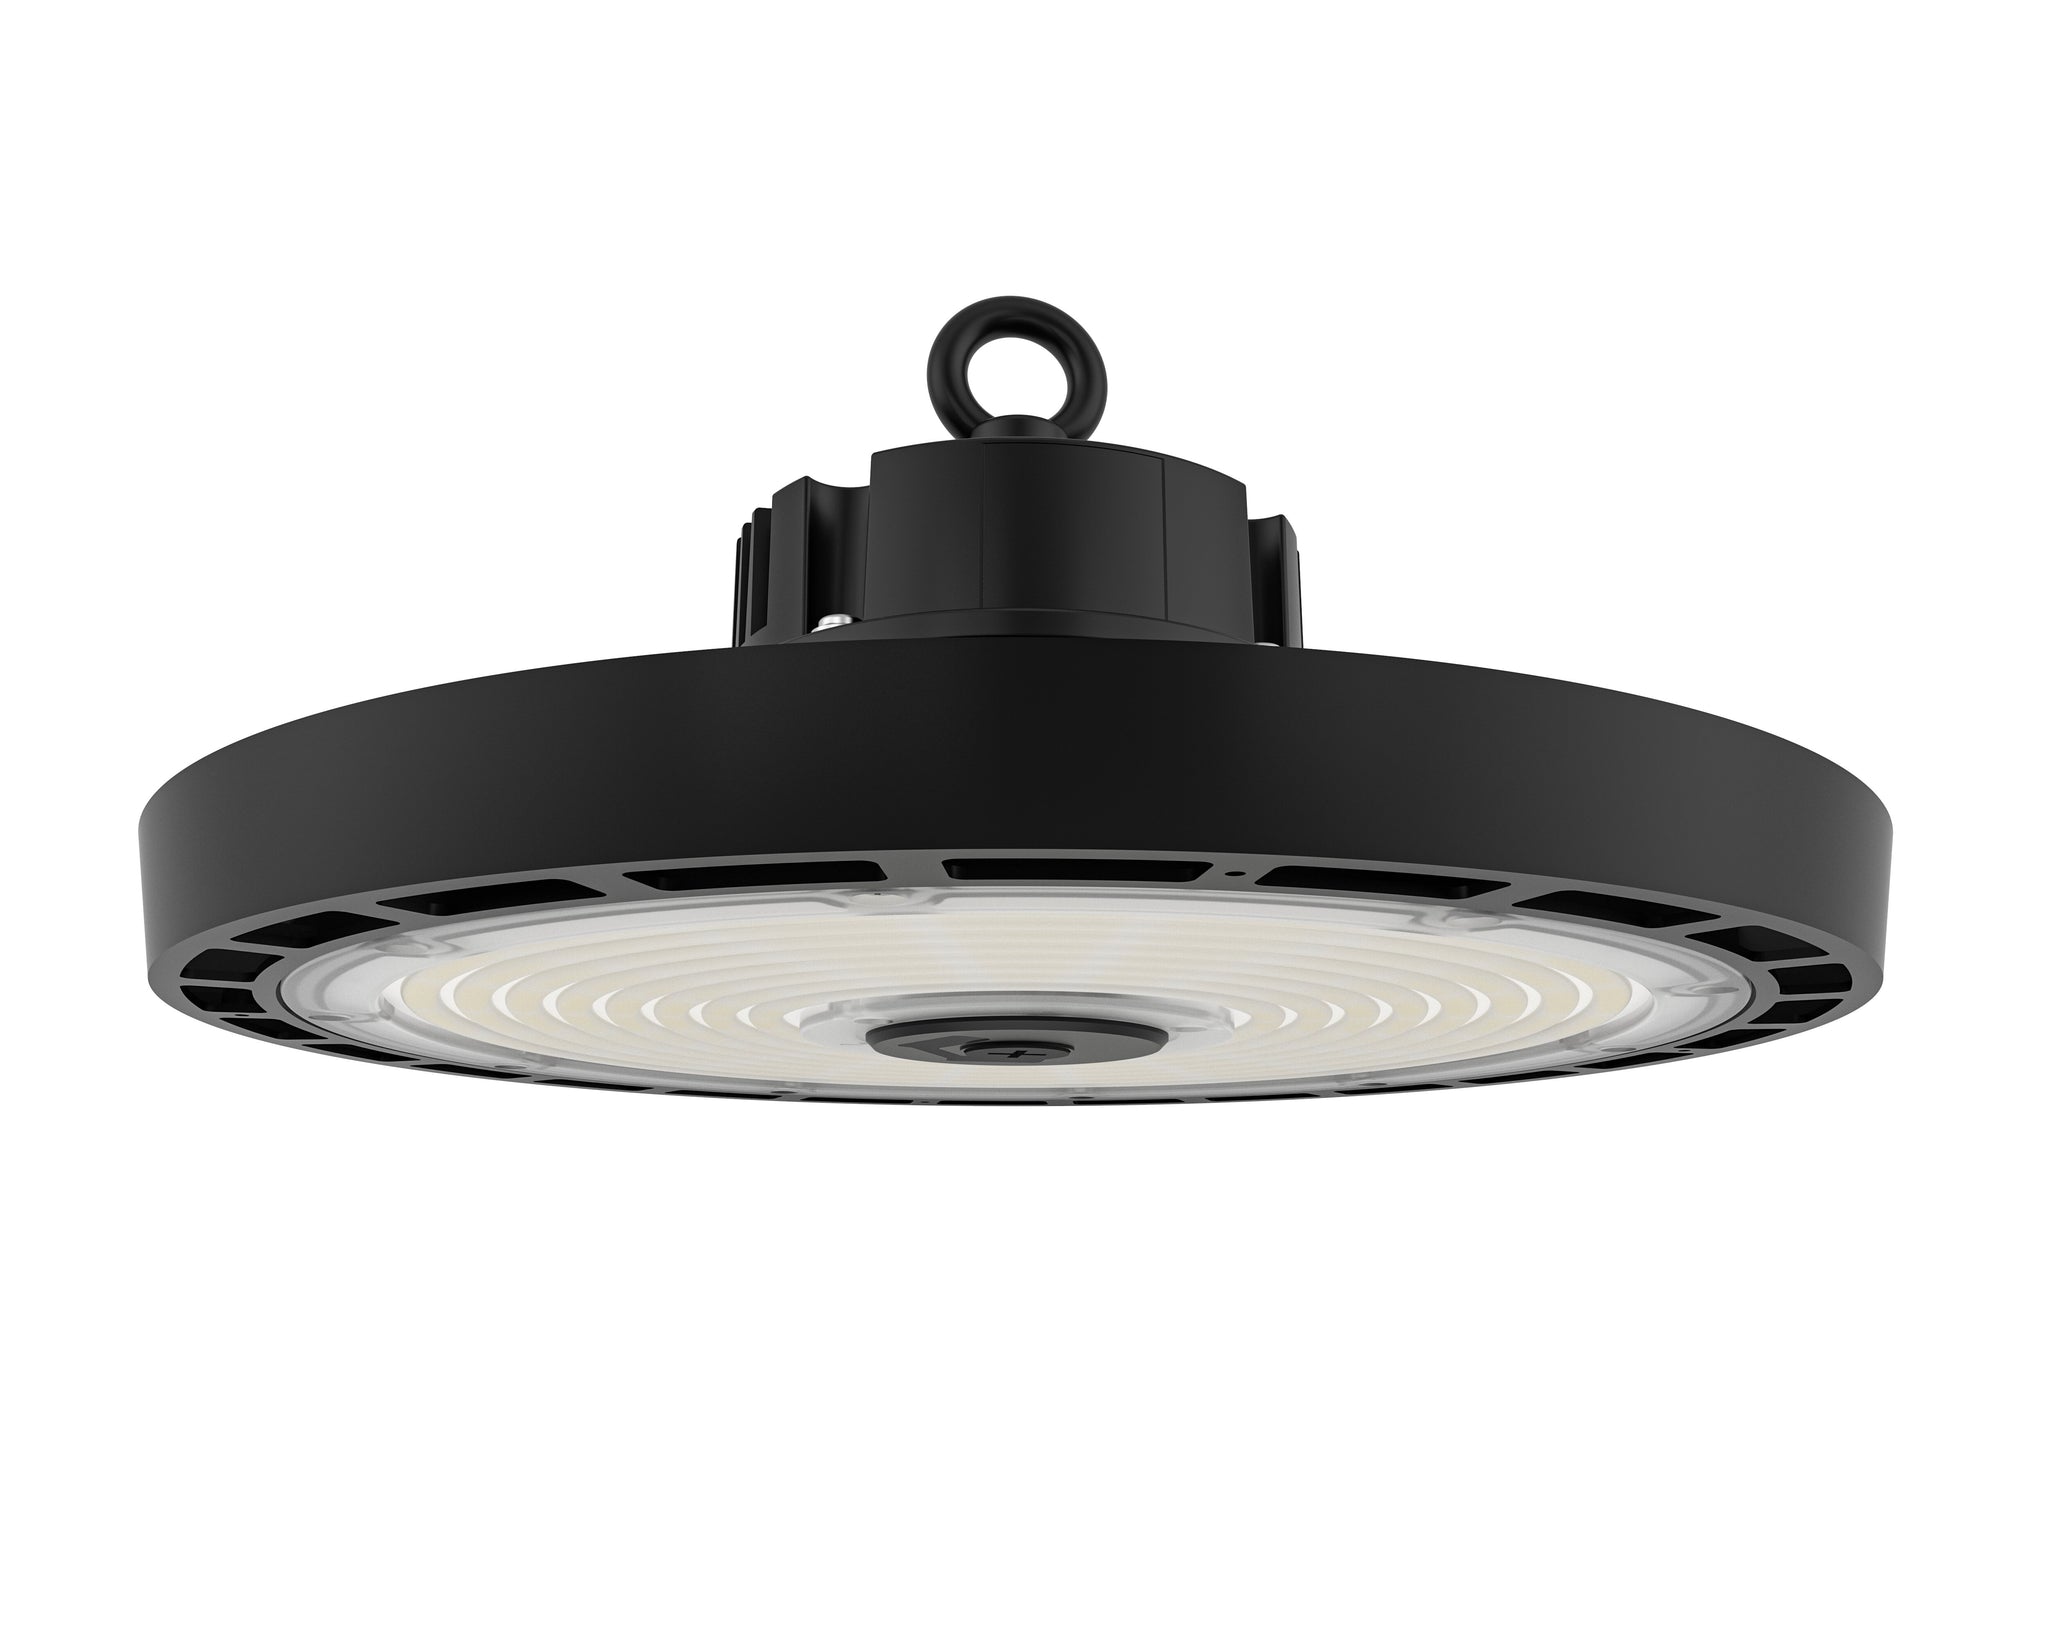 Tunable UFO LED High Bay Light: 150/200/240W, 38400Lm, IP65 Waterproof, Dimmable, Ideal for High Ceiling  4000/5000K Areas - Commercial Shops, Warehouses, Workshops, Factories, Garages